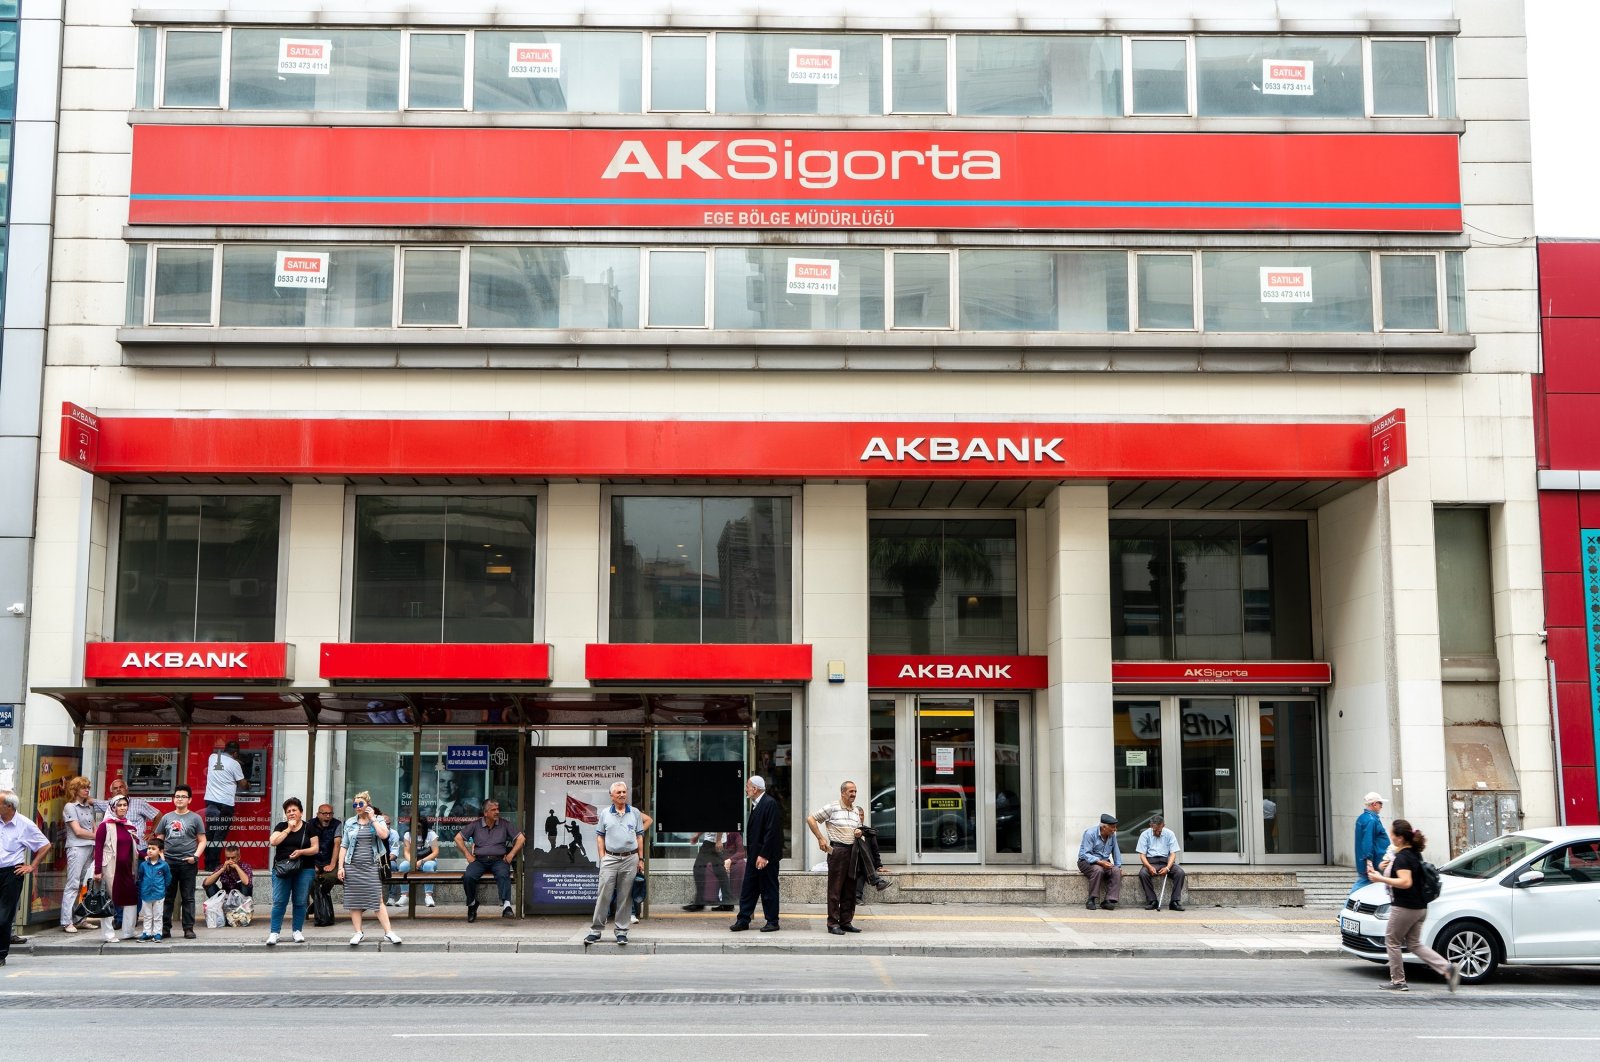 An Akbank branch is seen as people walk by and wait at a bus stop, Izmir, western Turkey, May 19, 2019. (Shutterstock Photo)